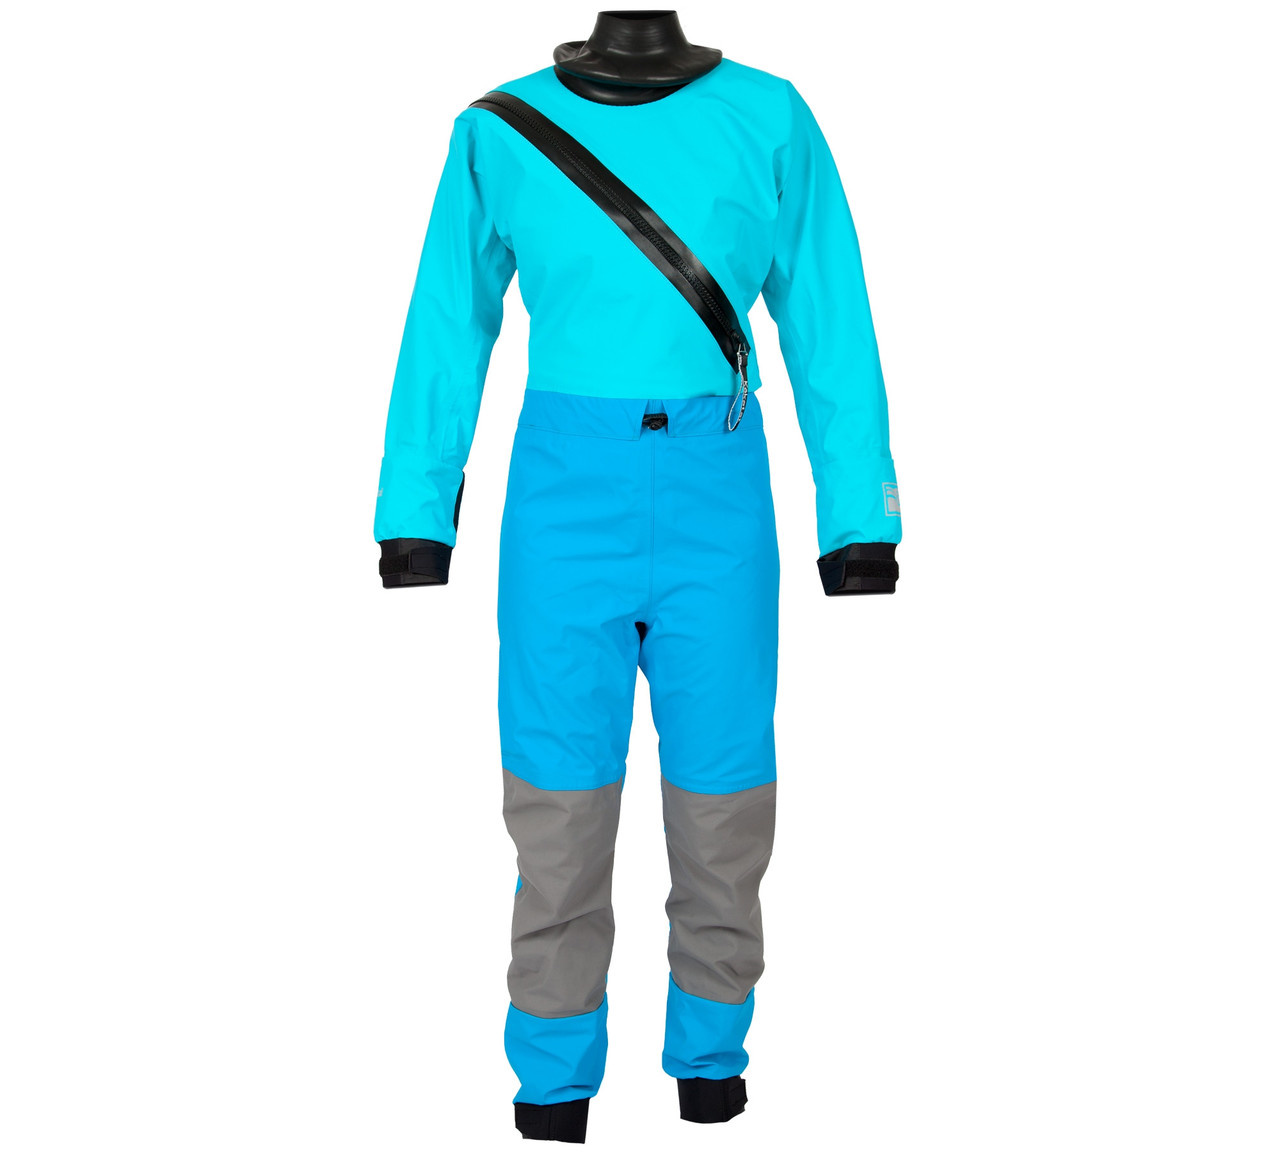 Swift Entry Dry Suit (Hydrus 3.0)